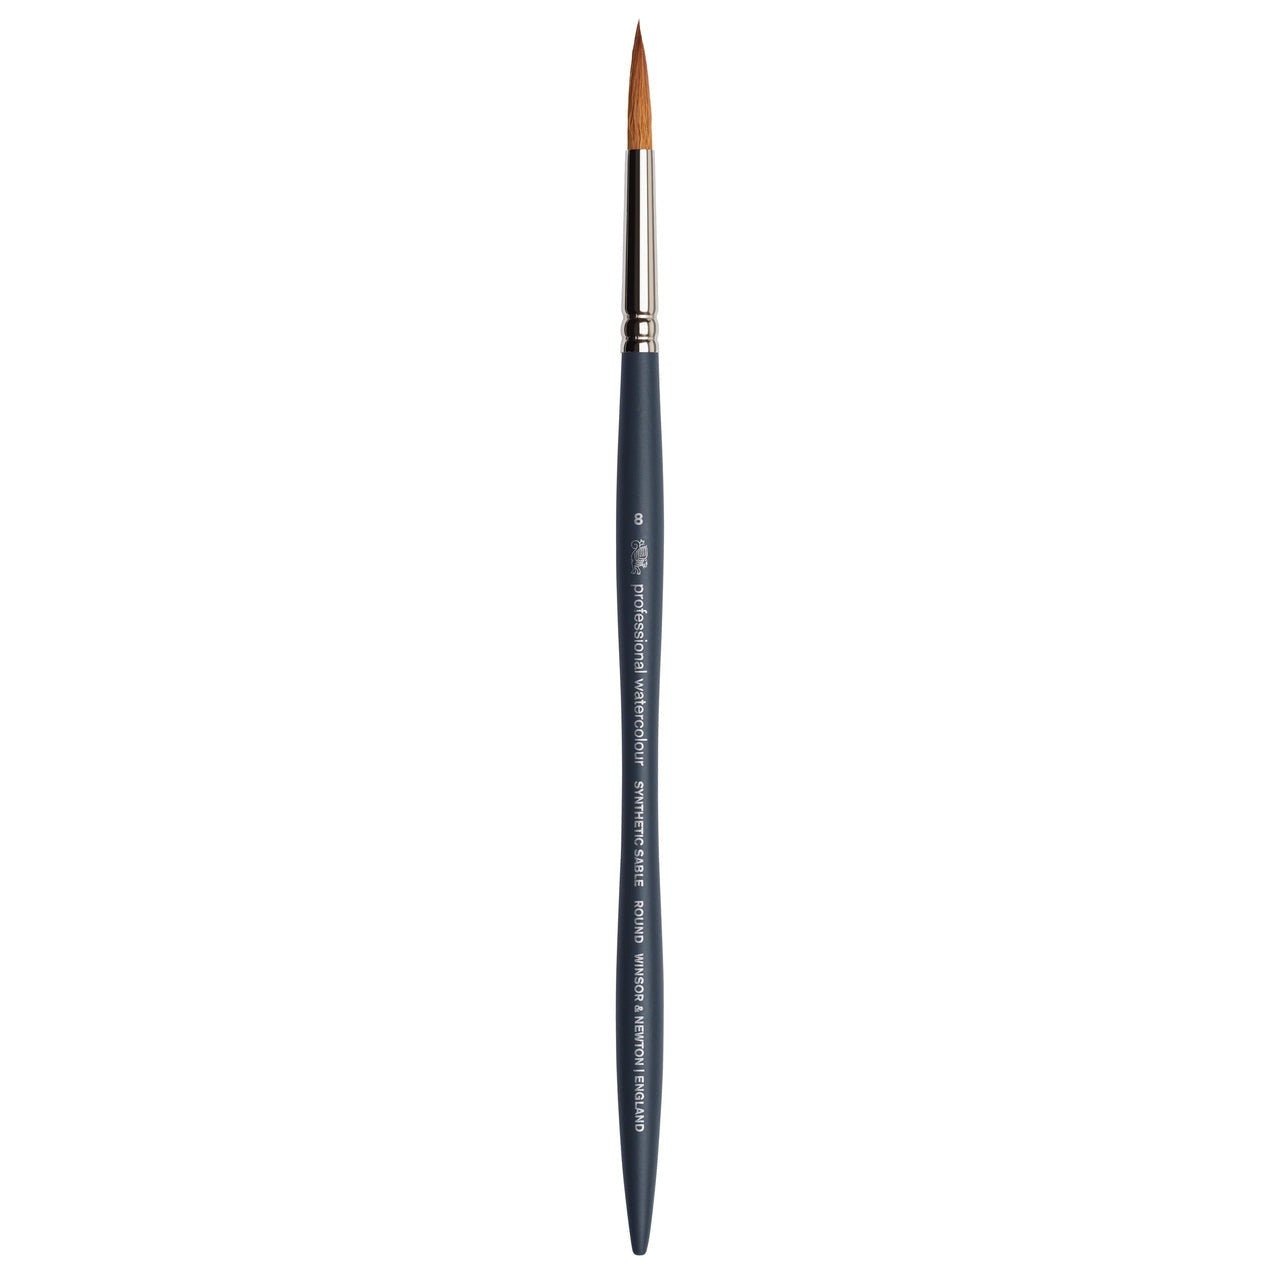 Winsor & Newton Professional Watercolor Synthetic Sable Brush - Round 8 - merriartist.com